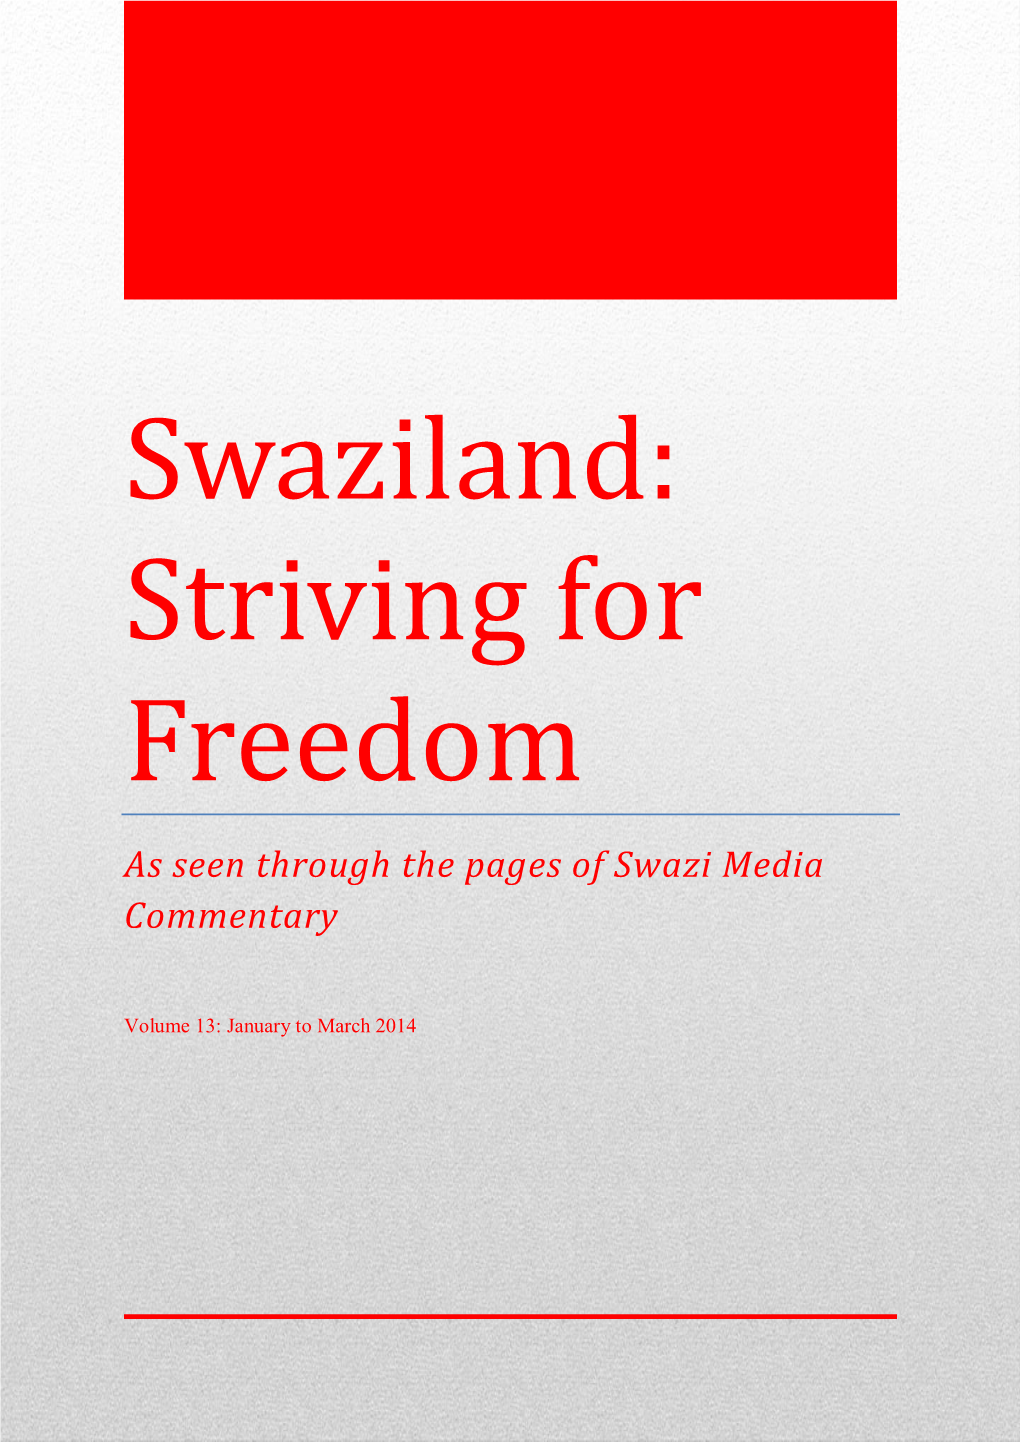 Swaziland: Striving for Freedom